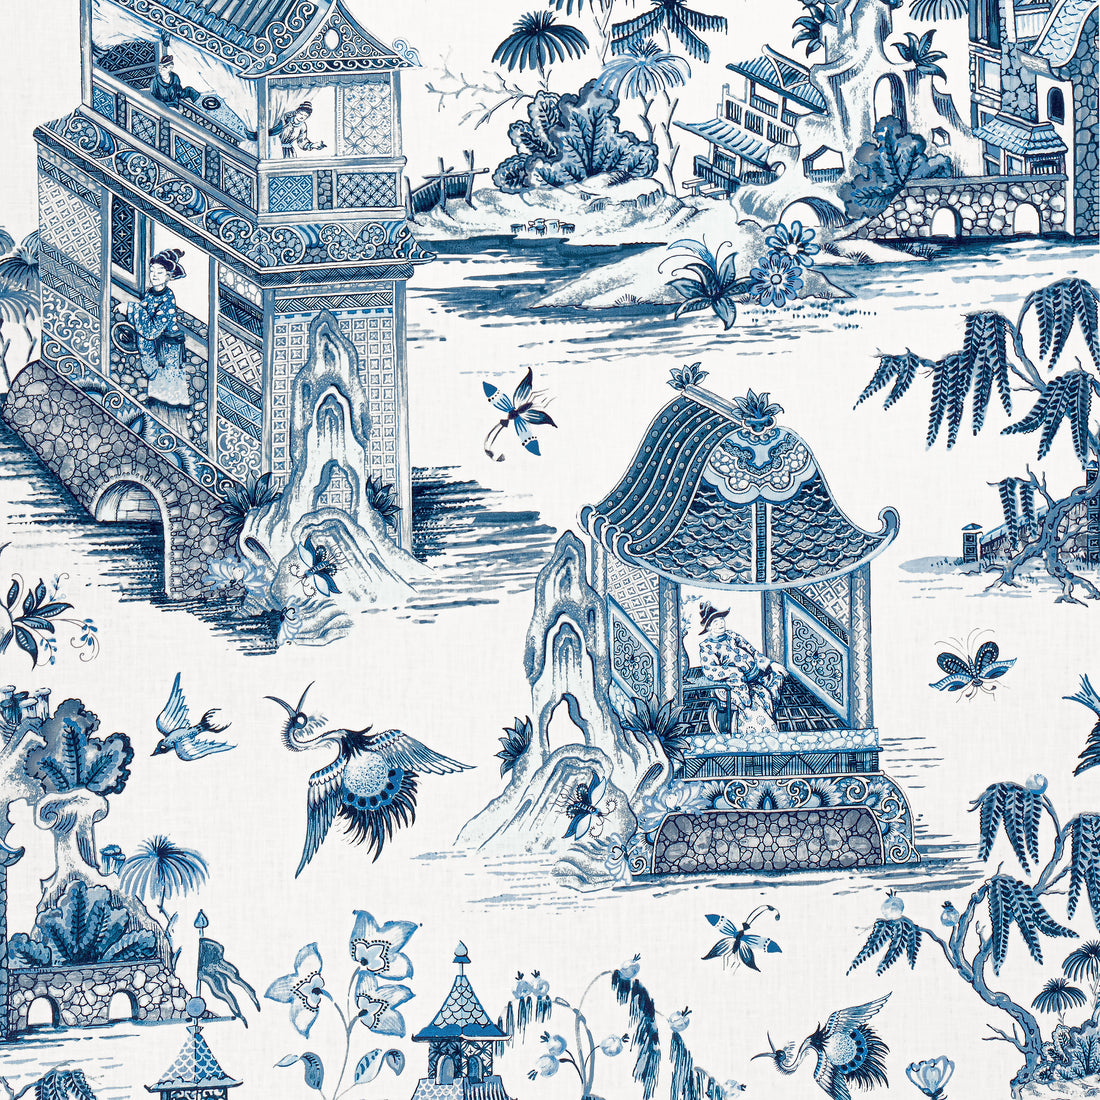 Grand Palace fabric in blue and white - pattern number F913614 - by Thibaut in the Grand Palace collection